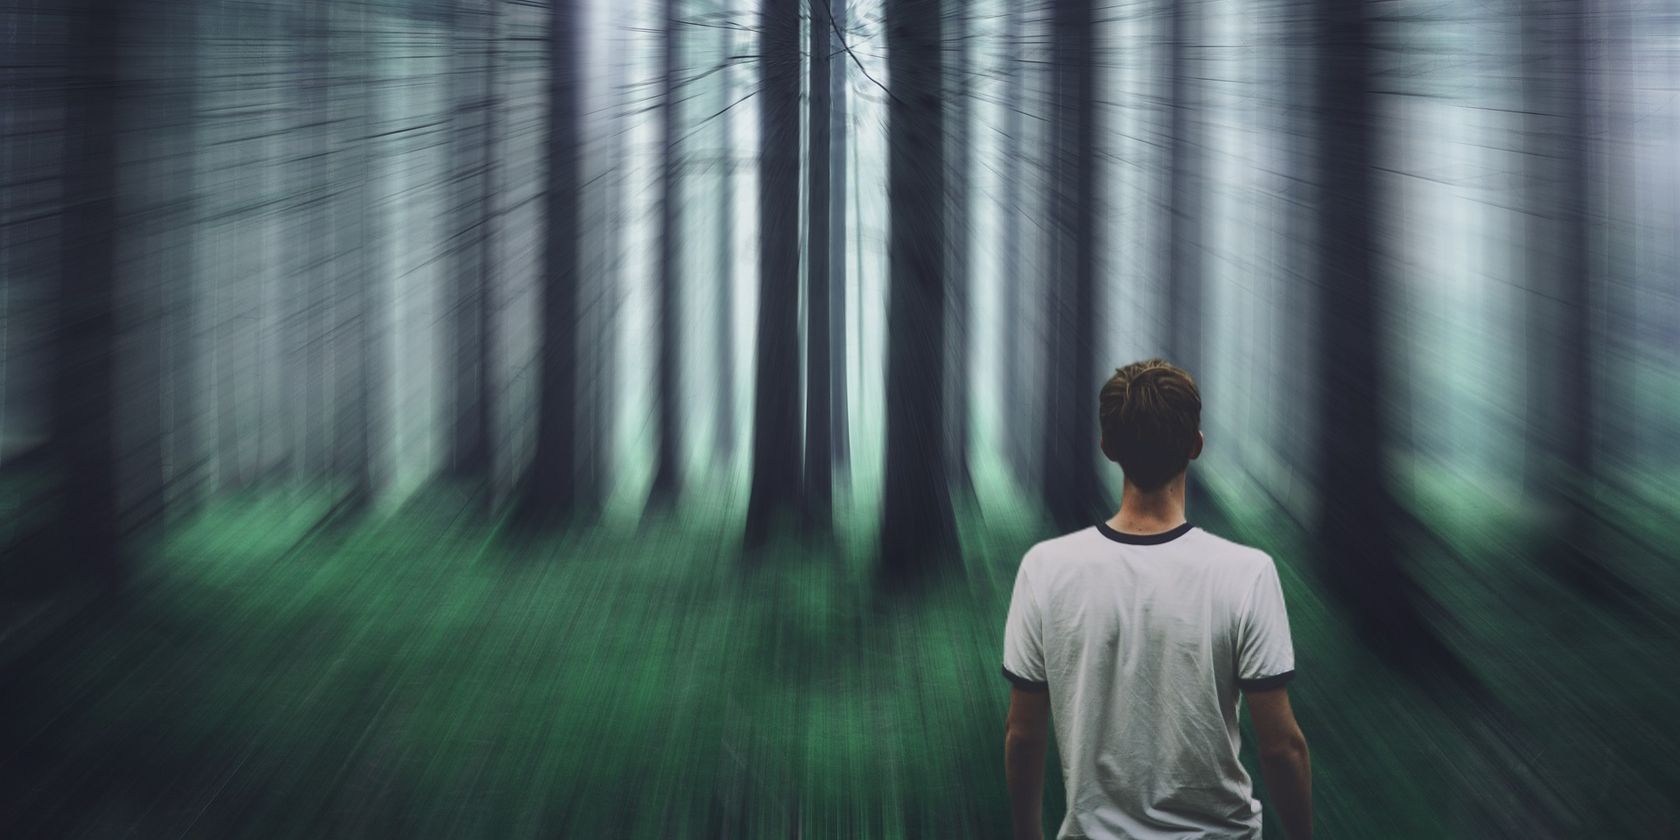 A person facing a forest, with blurry effect